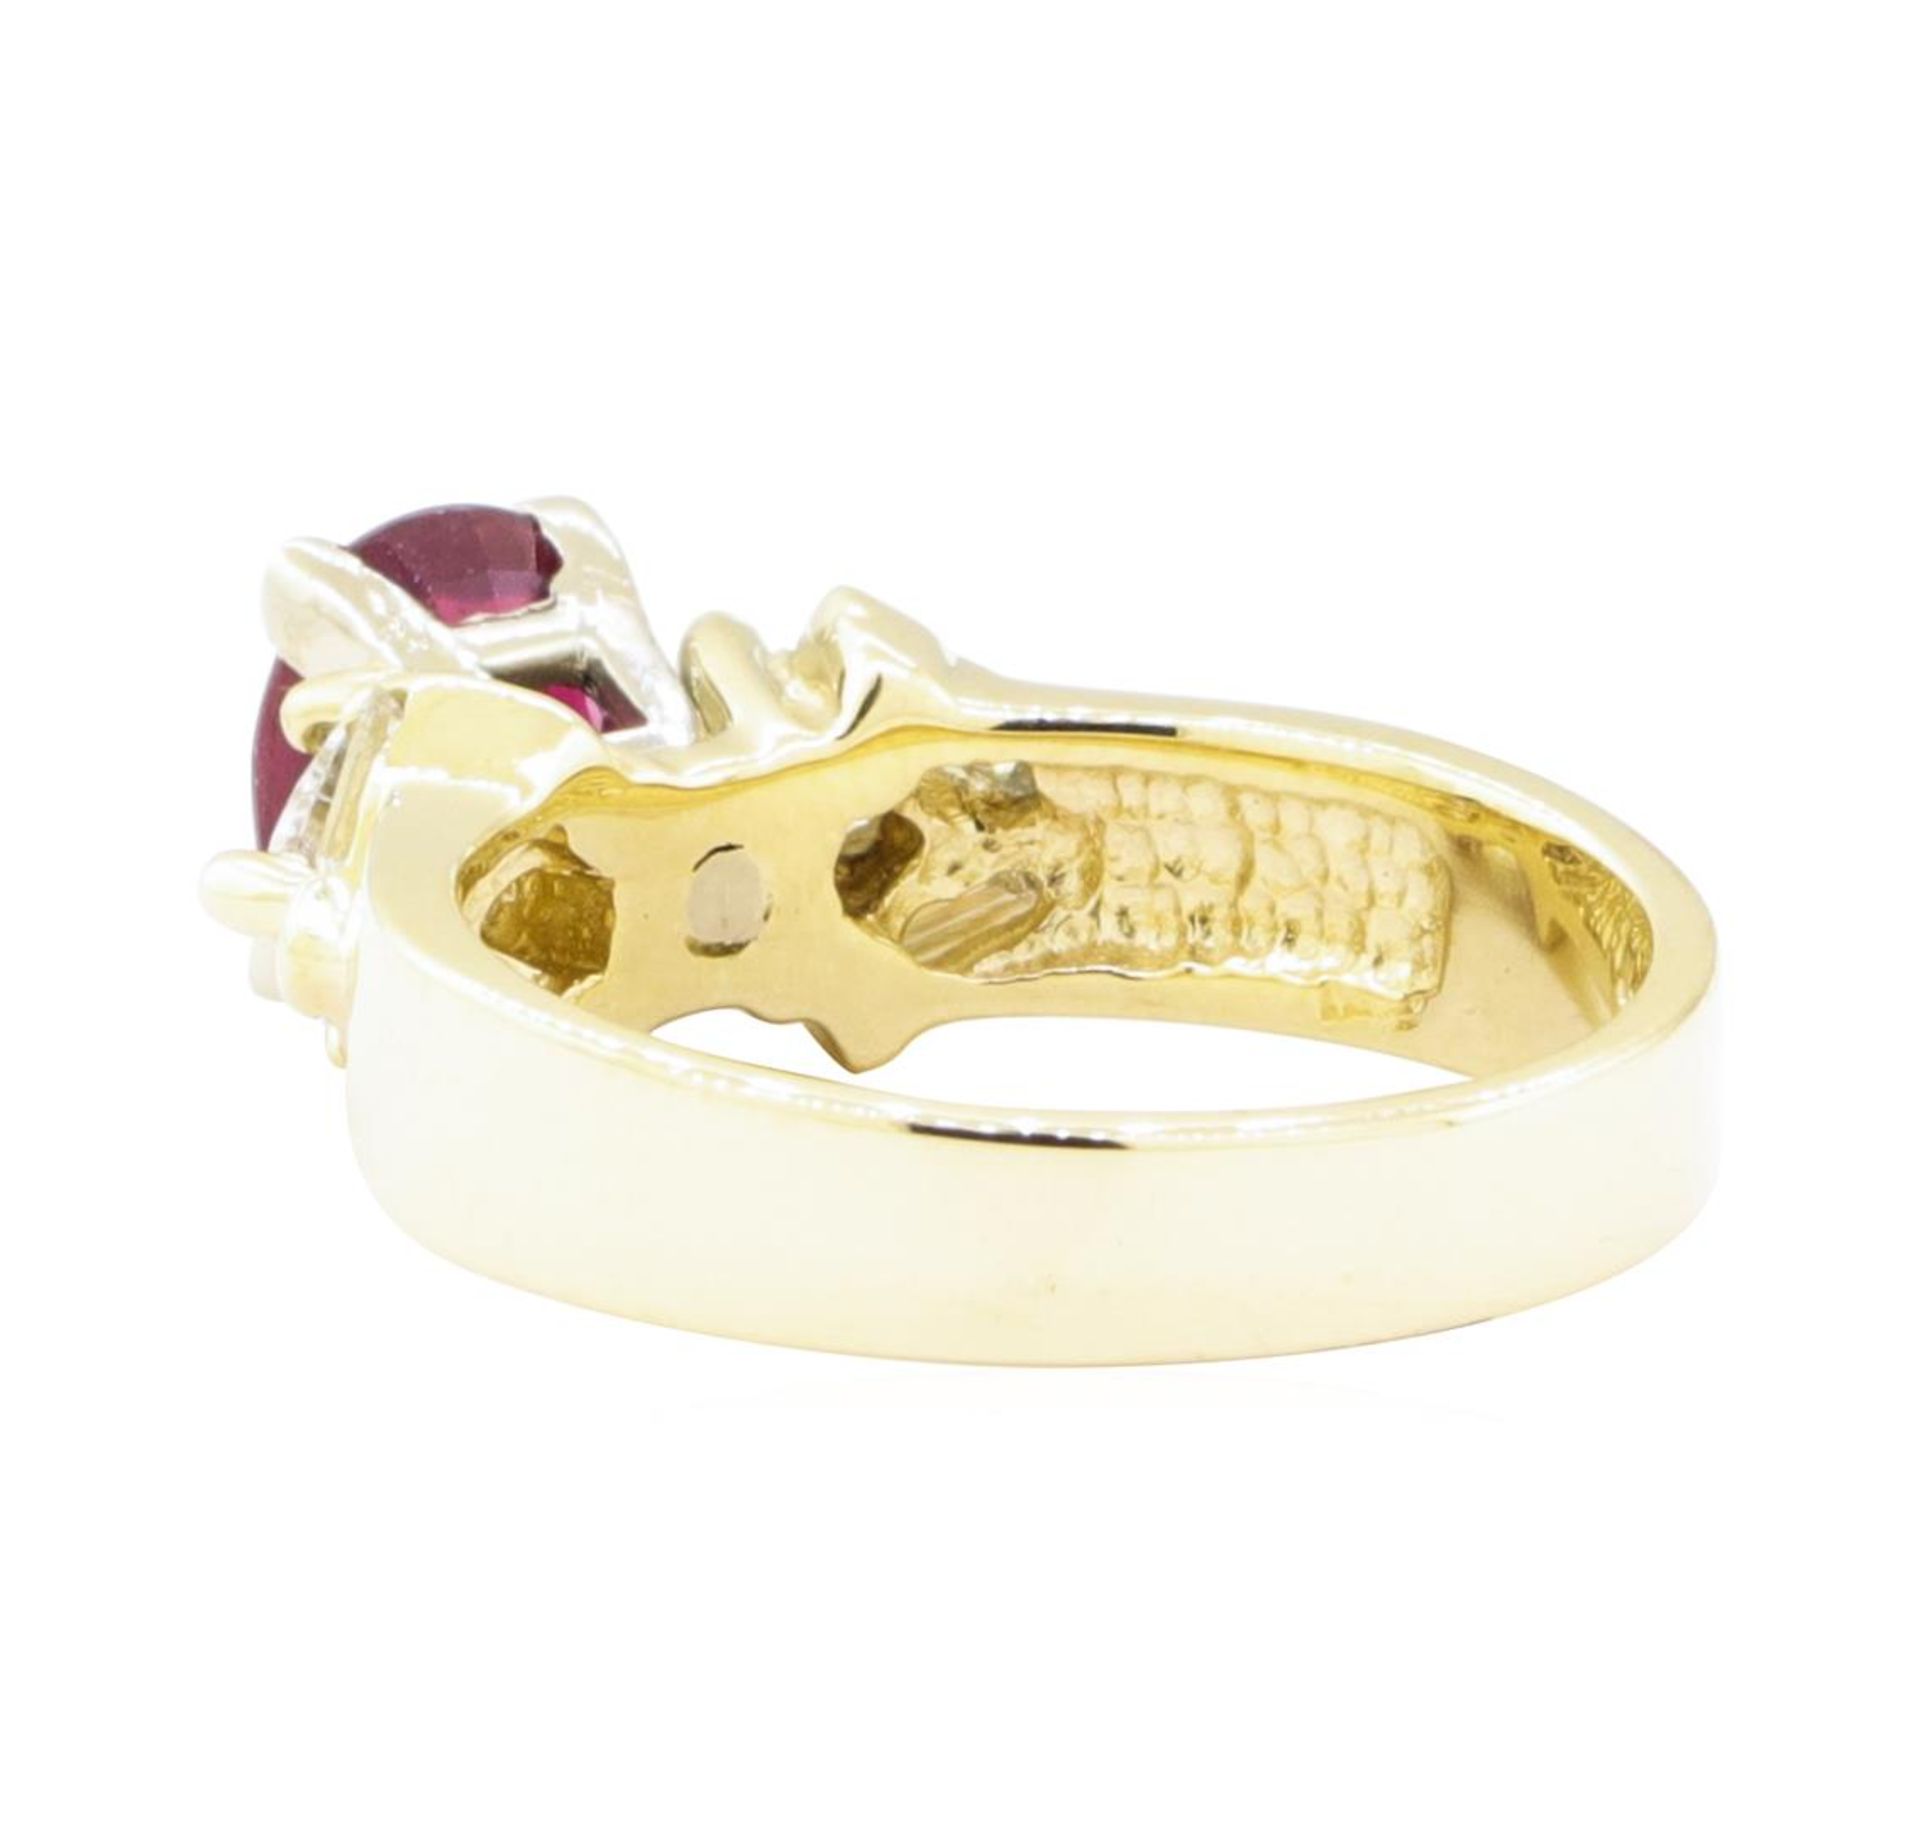 1.91ctw Ruby and Diamond Ring - 14KT Yellow Gold - Image 3 of 4